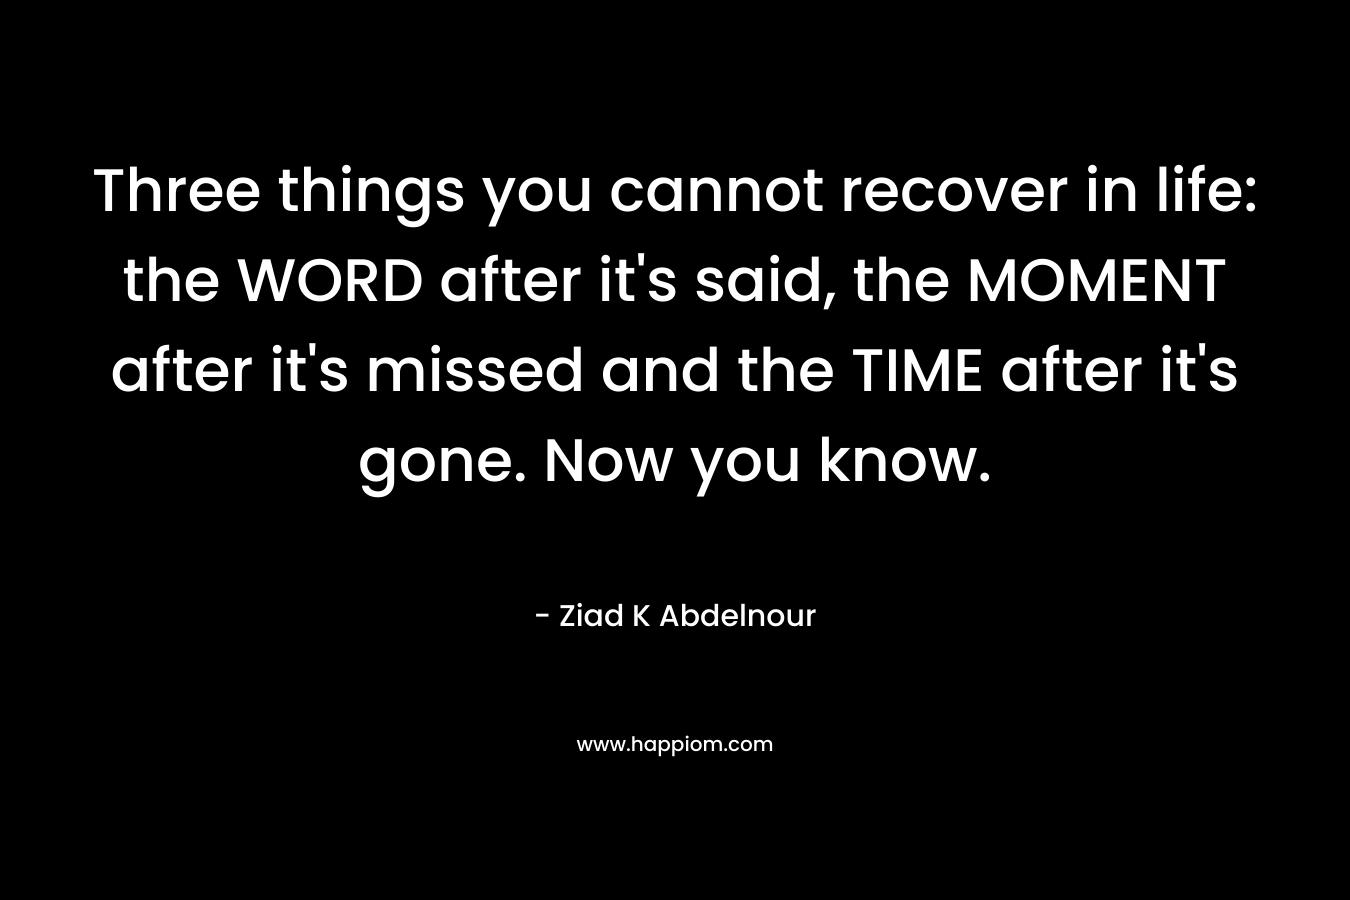 Three things you cannot recover in life: the WORD after it's said, the MOMENT after it's missed and the TIME after it's gone. Now you know.